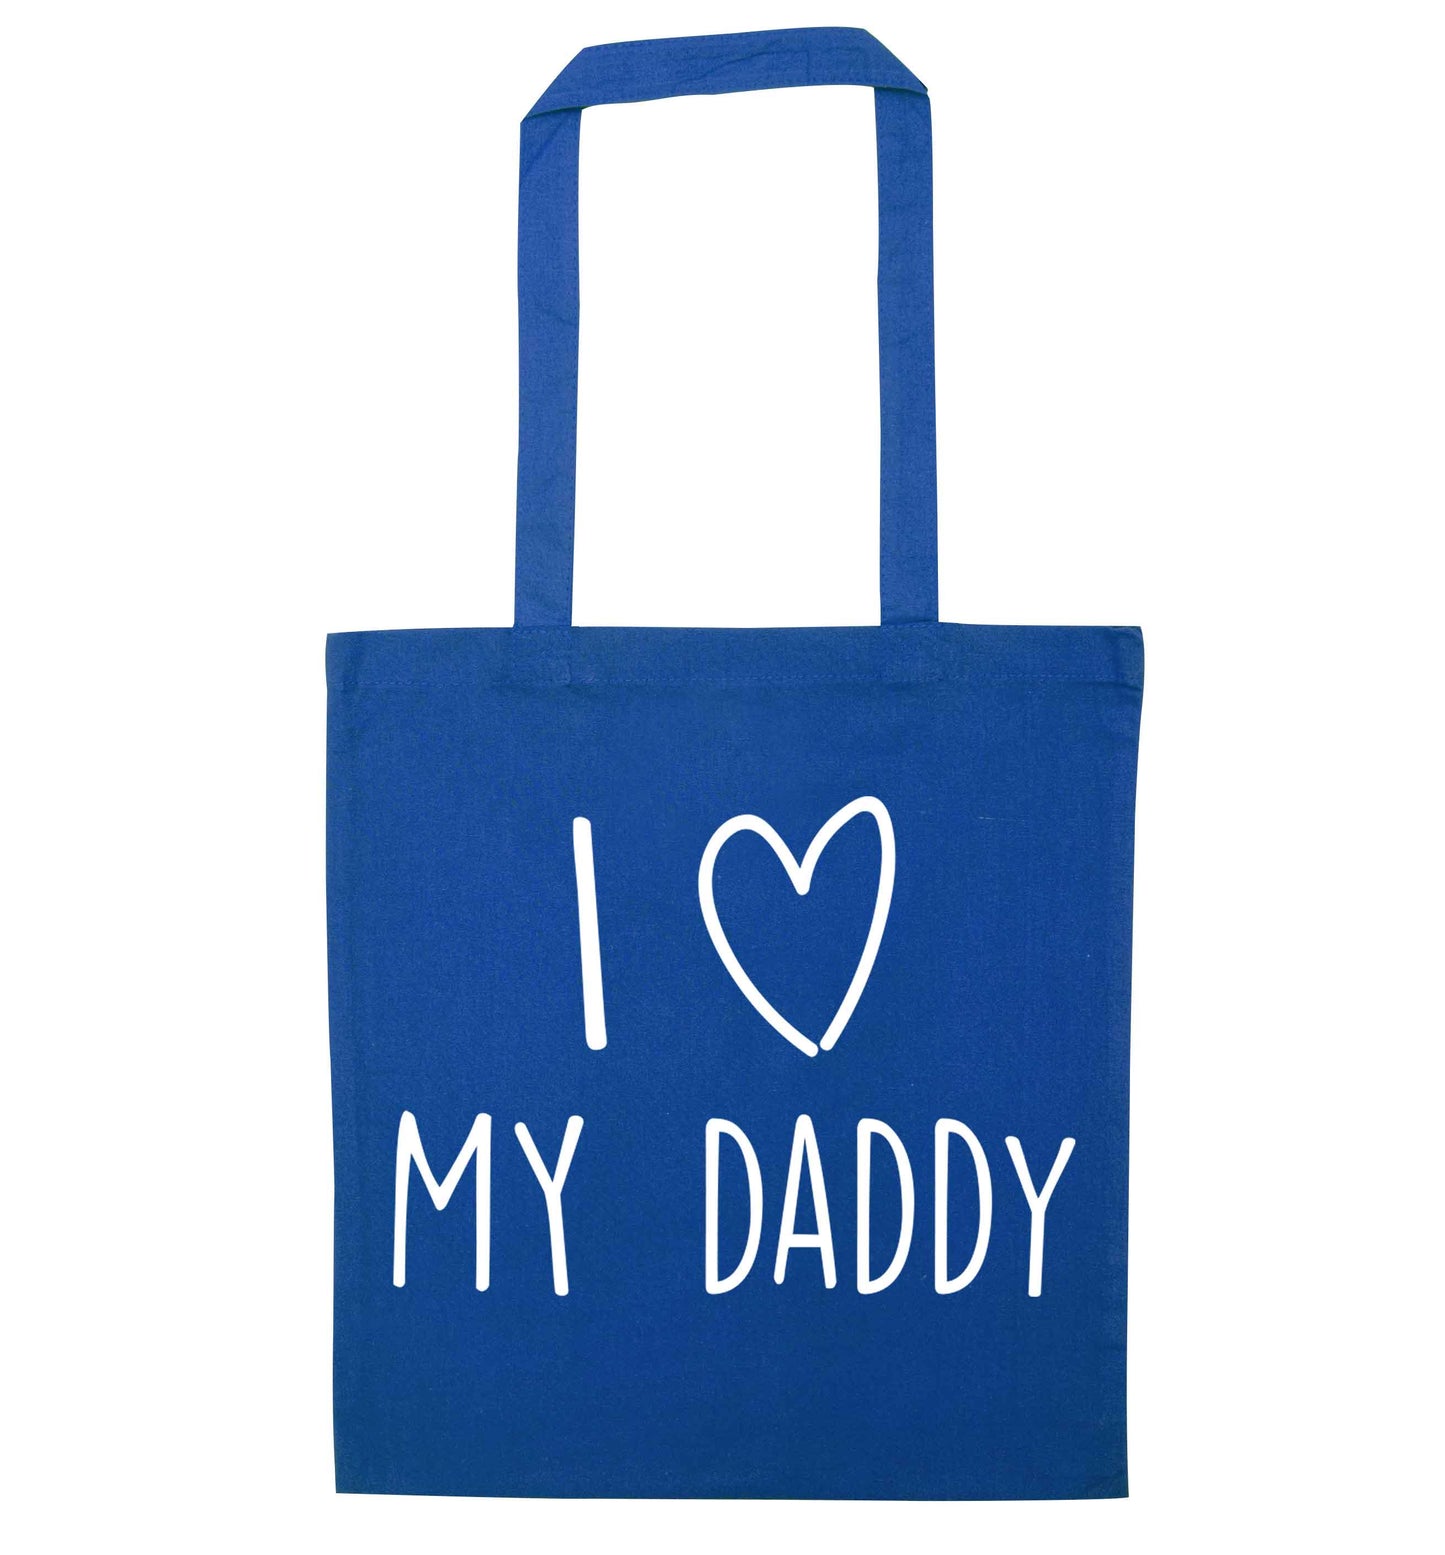 I love my daddy blue tote bag